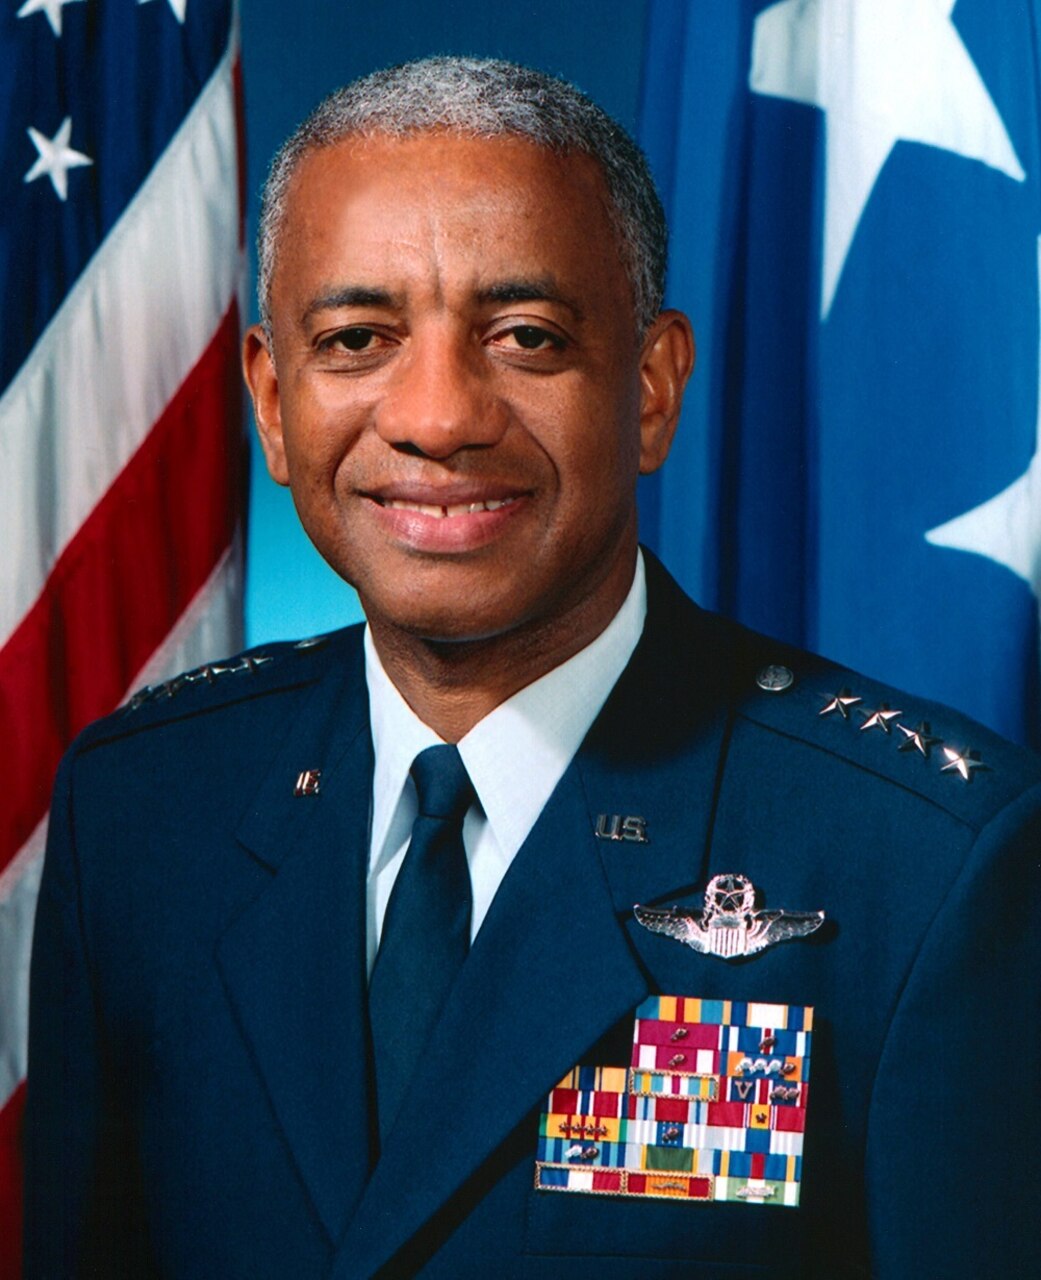 An Air Force general in uniform poses for a photo in front of the U.S. flag.